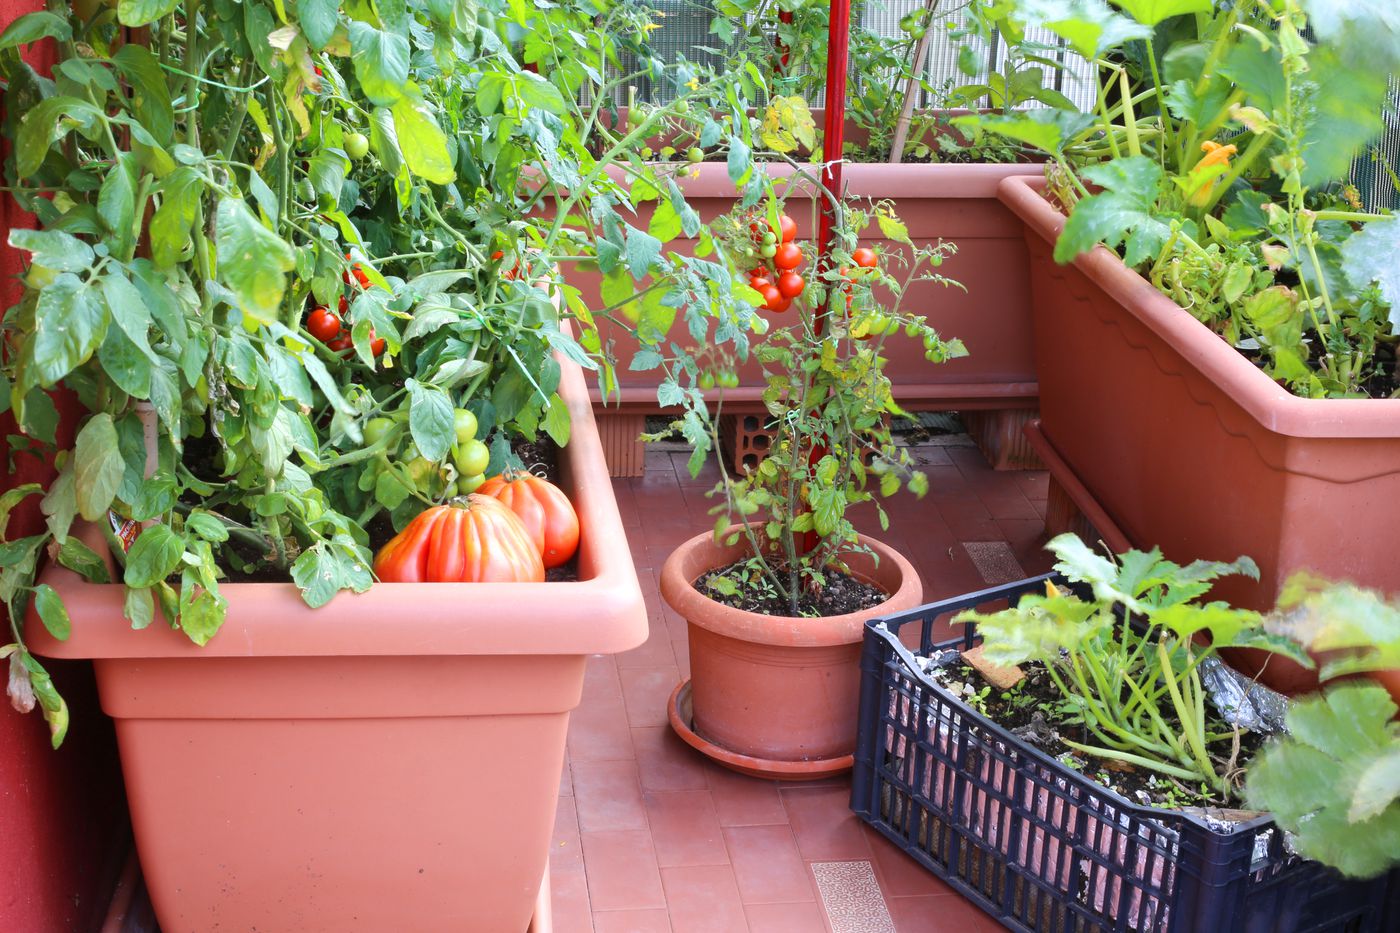 If you don't have a garden, you can still plant vegetables right now.